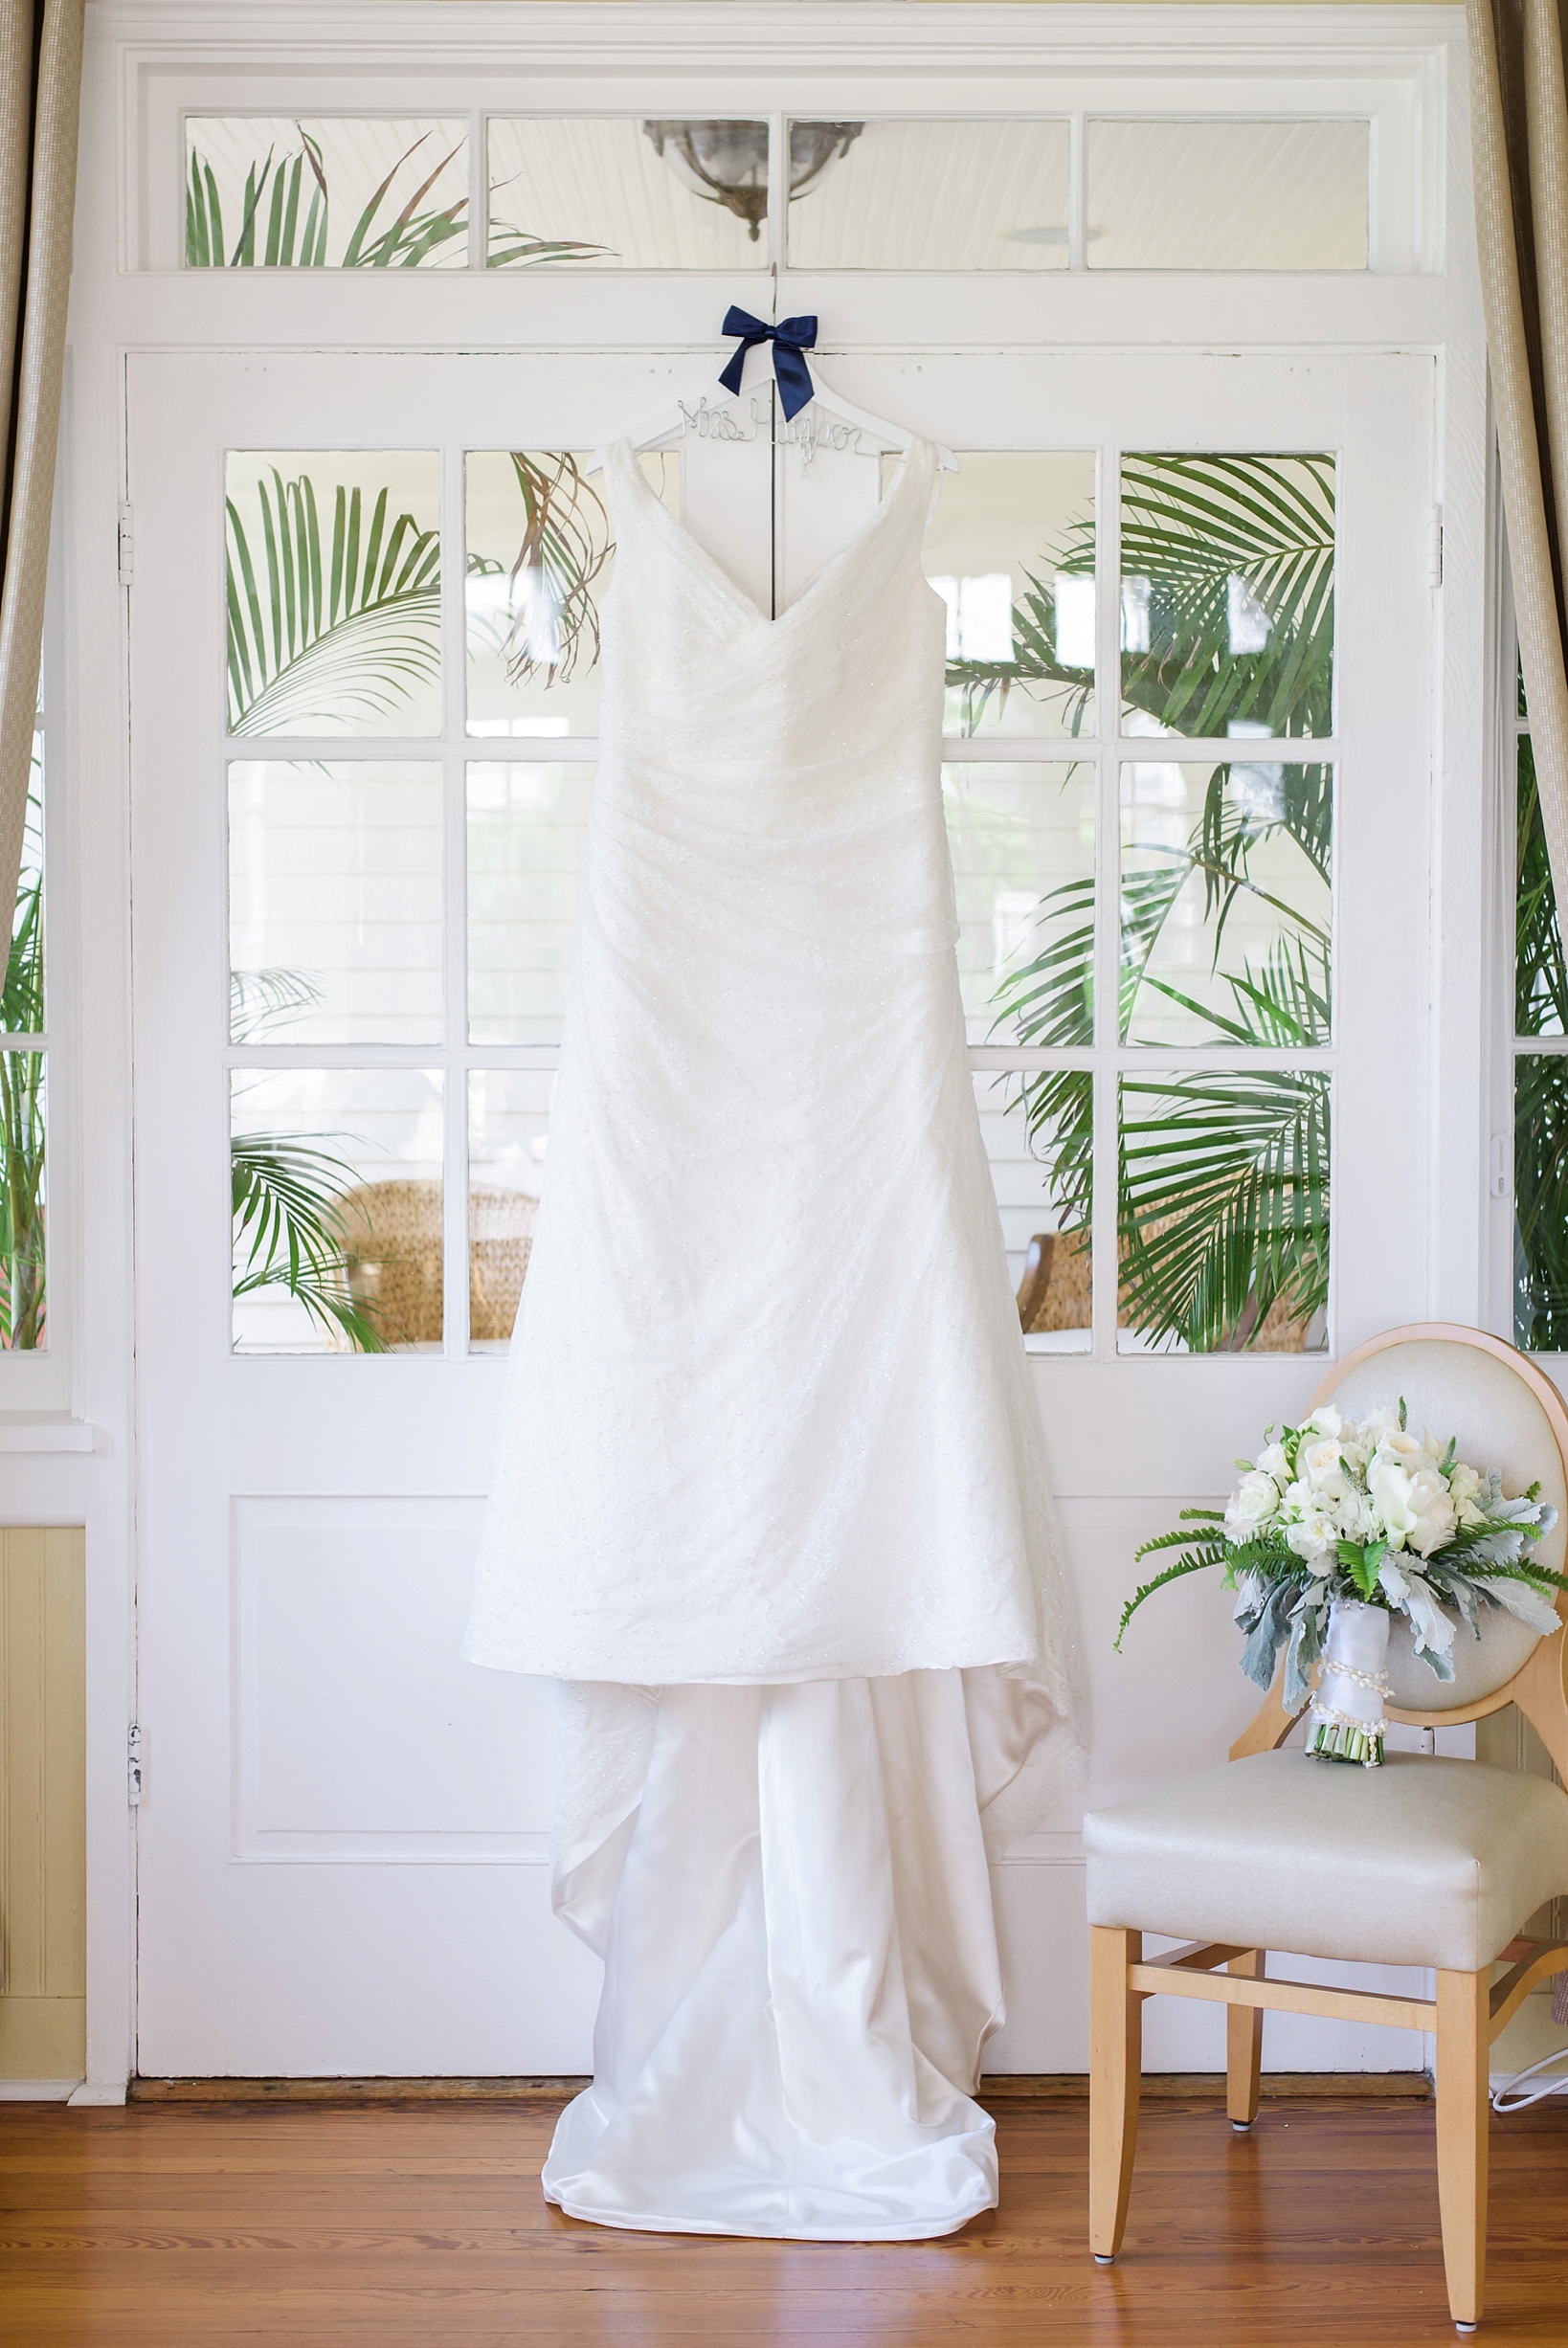 The wedding dress hanging in the sun room of the Palmetto Riverside B&B